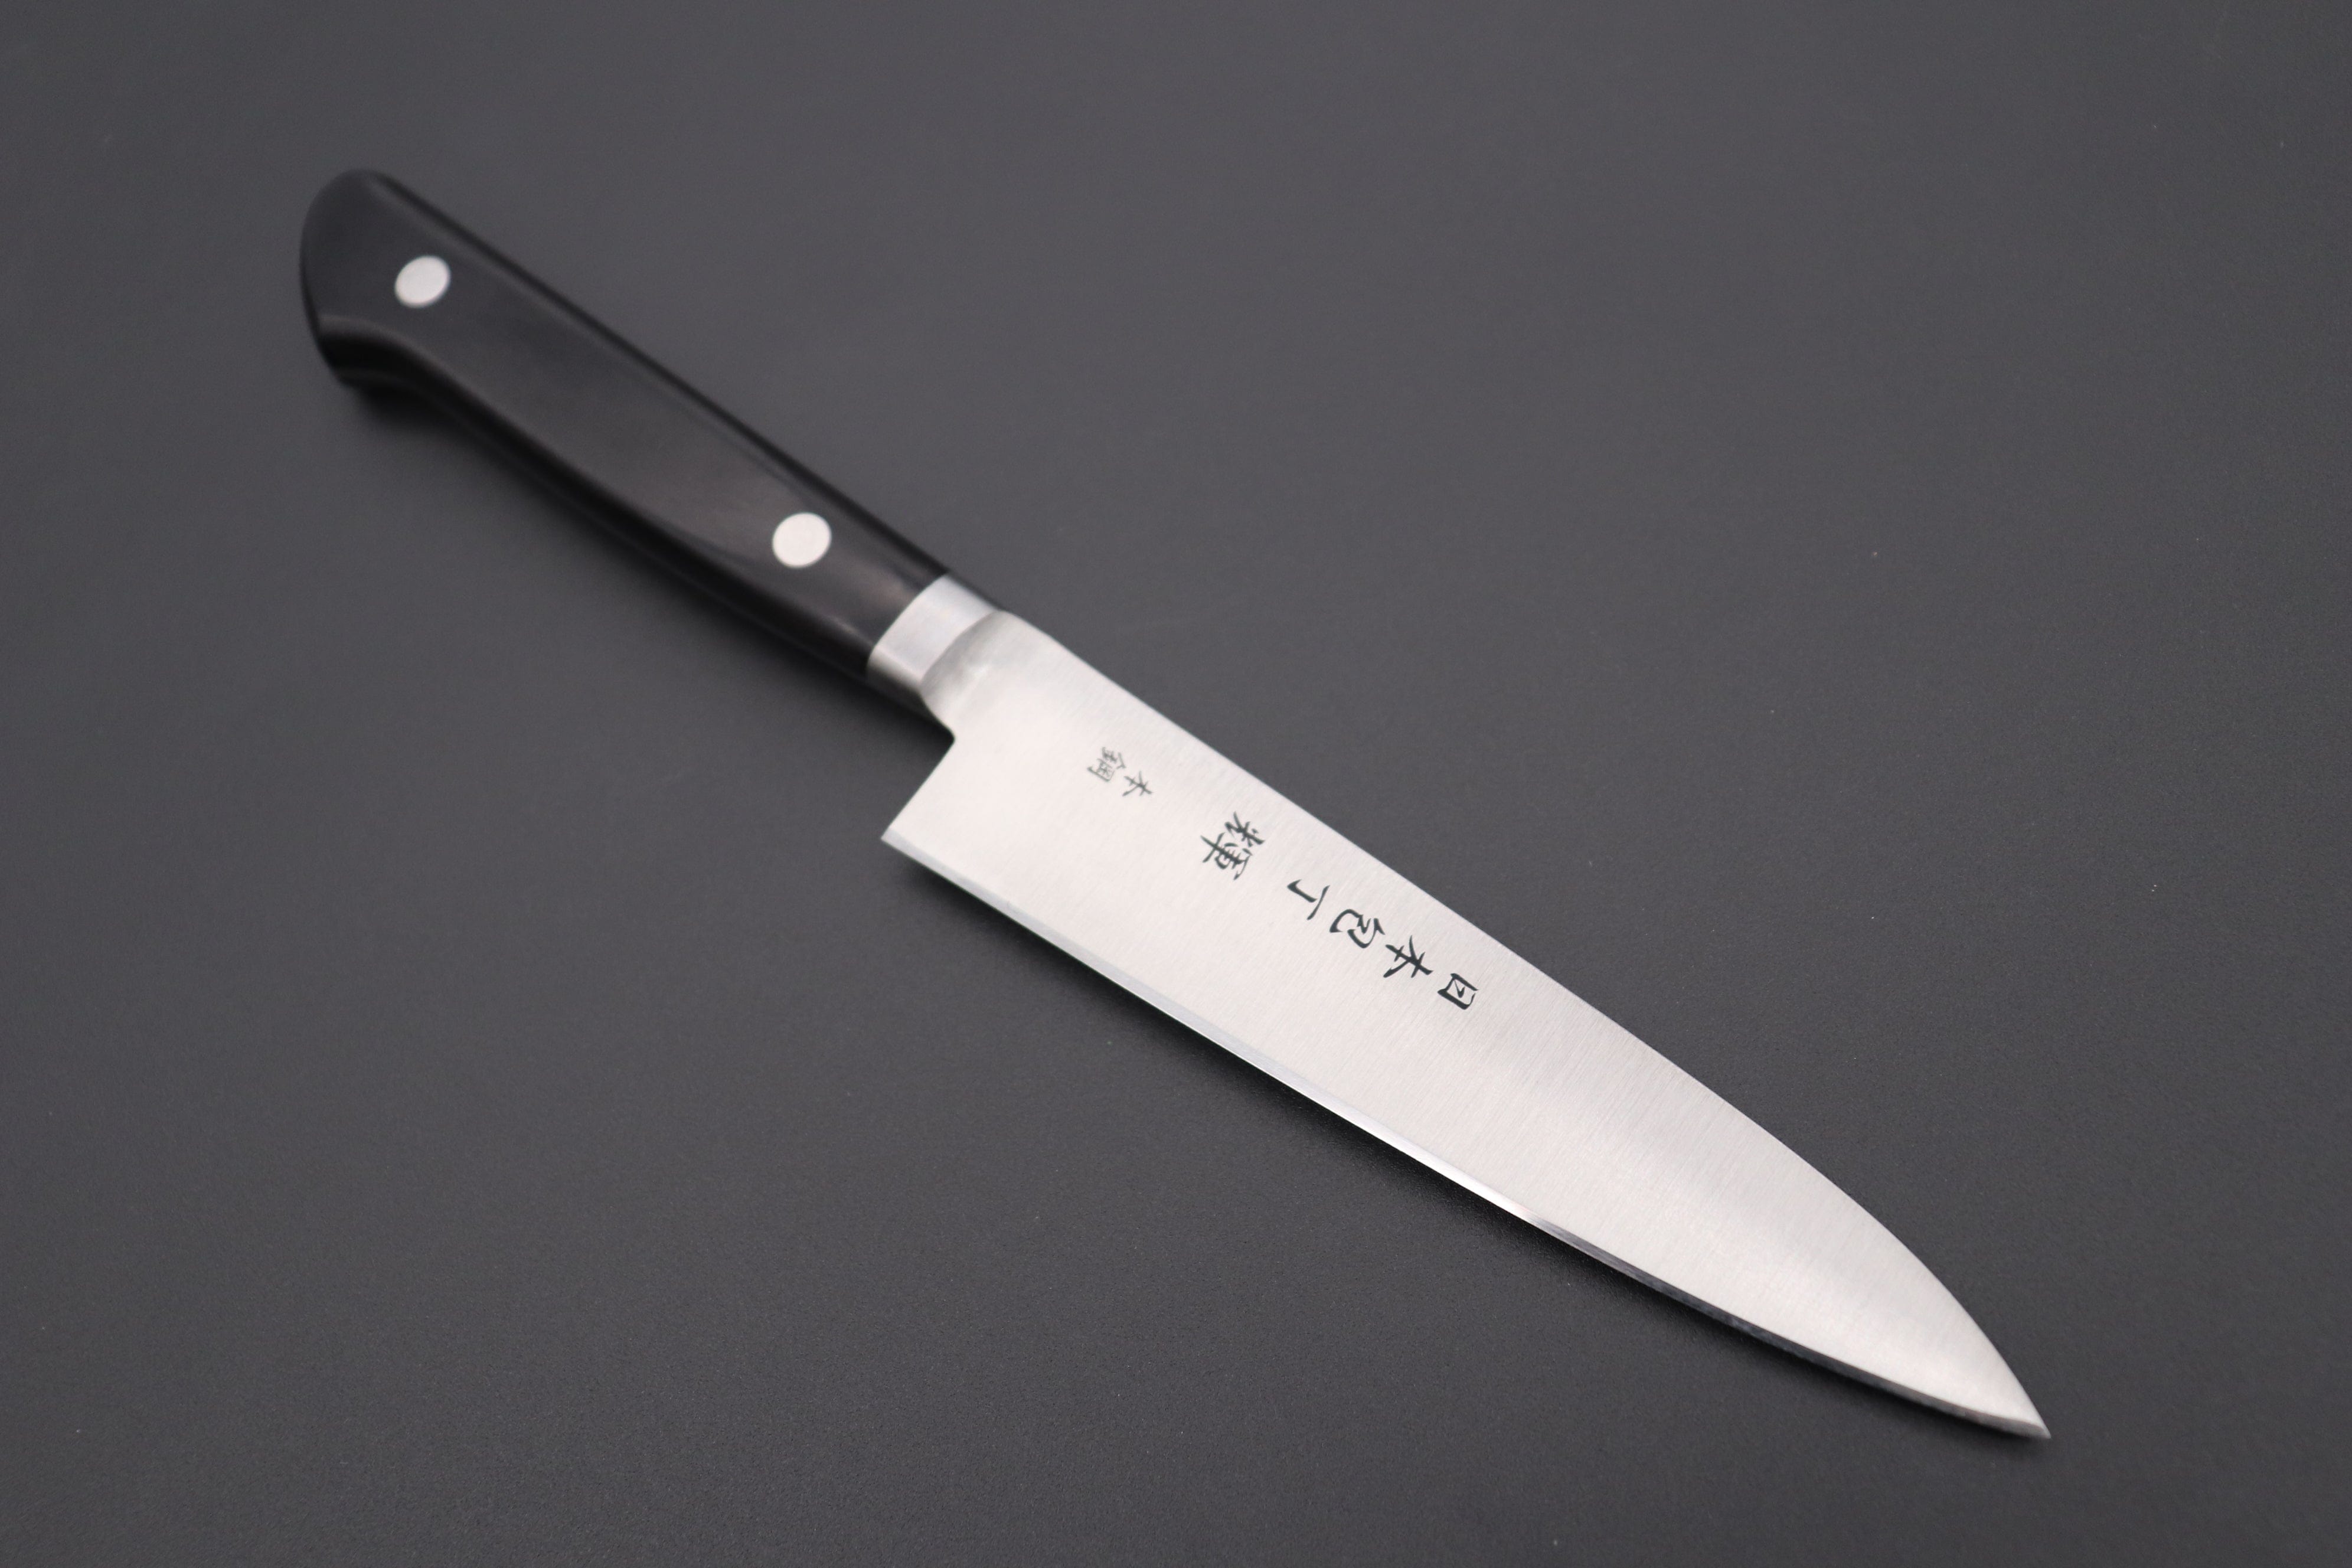 The Best Carbon-Steel Knives